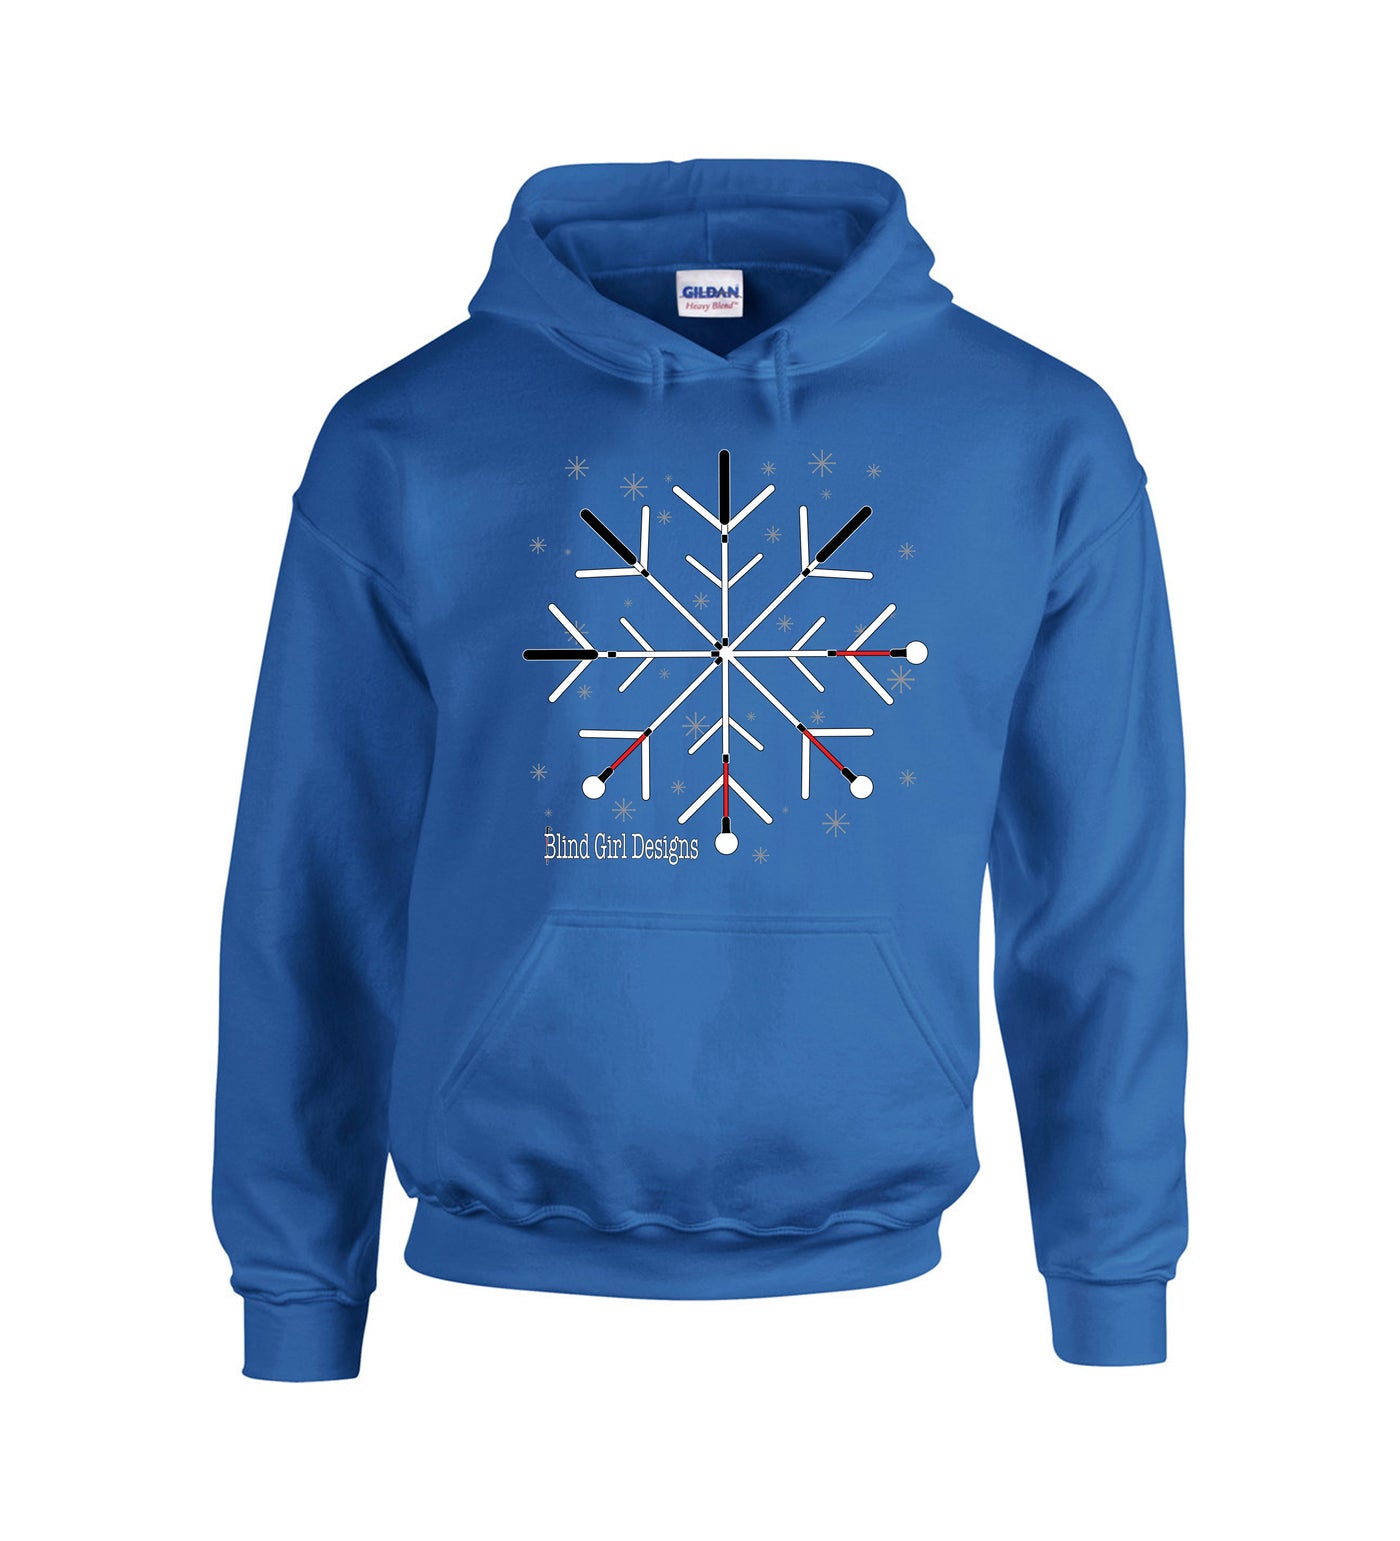 Kids and Toddlers Snowflake White Cane Hoodie - Royal Blue